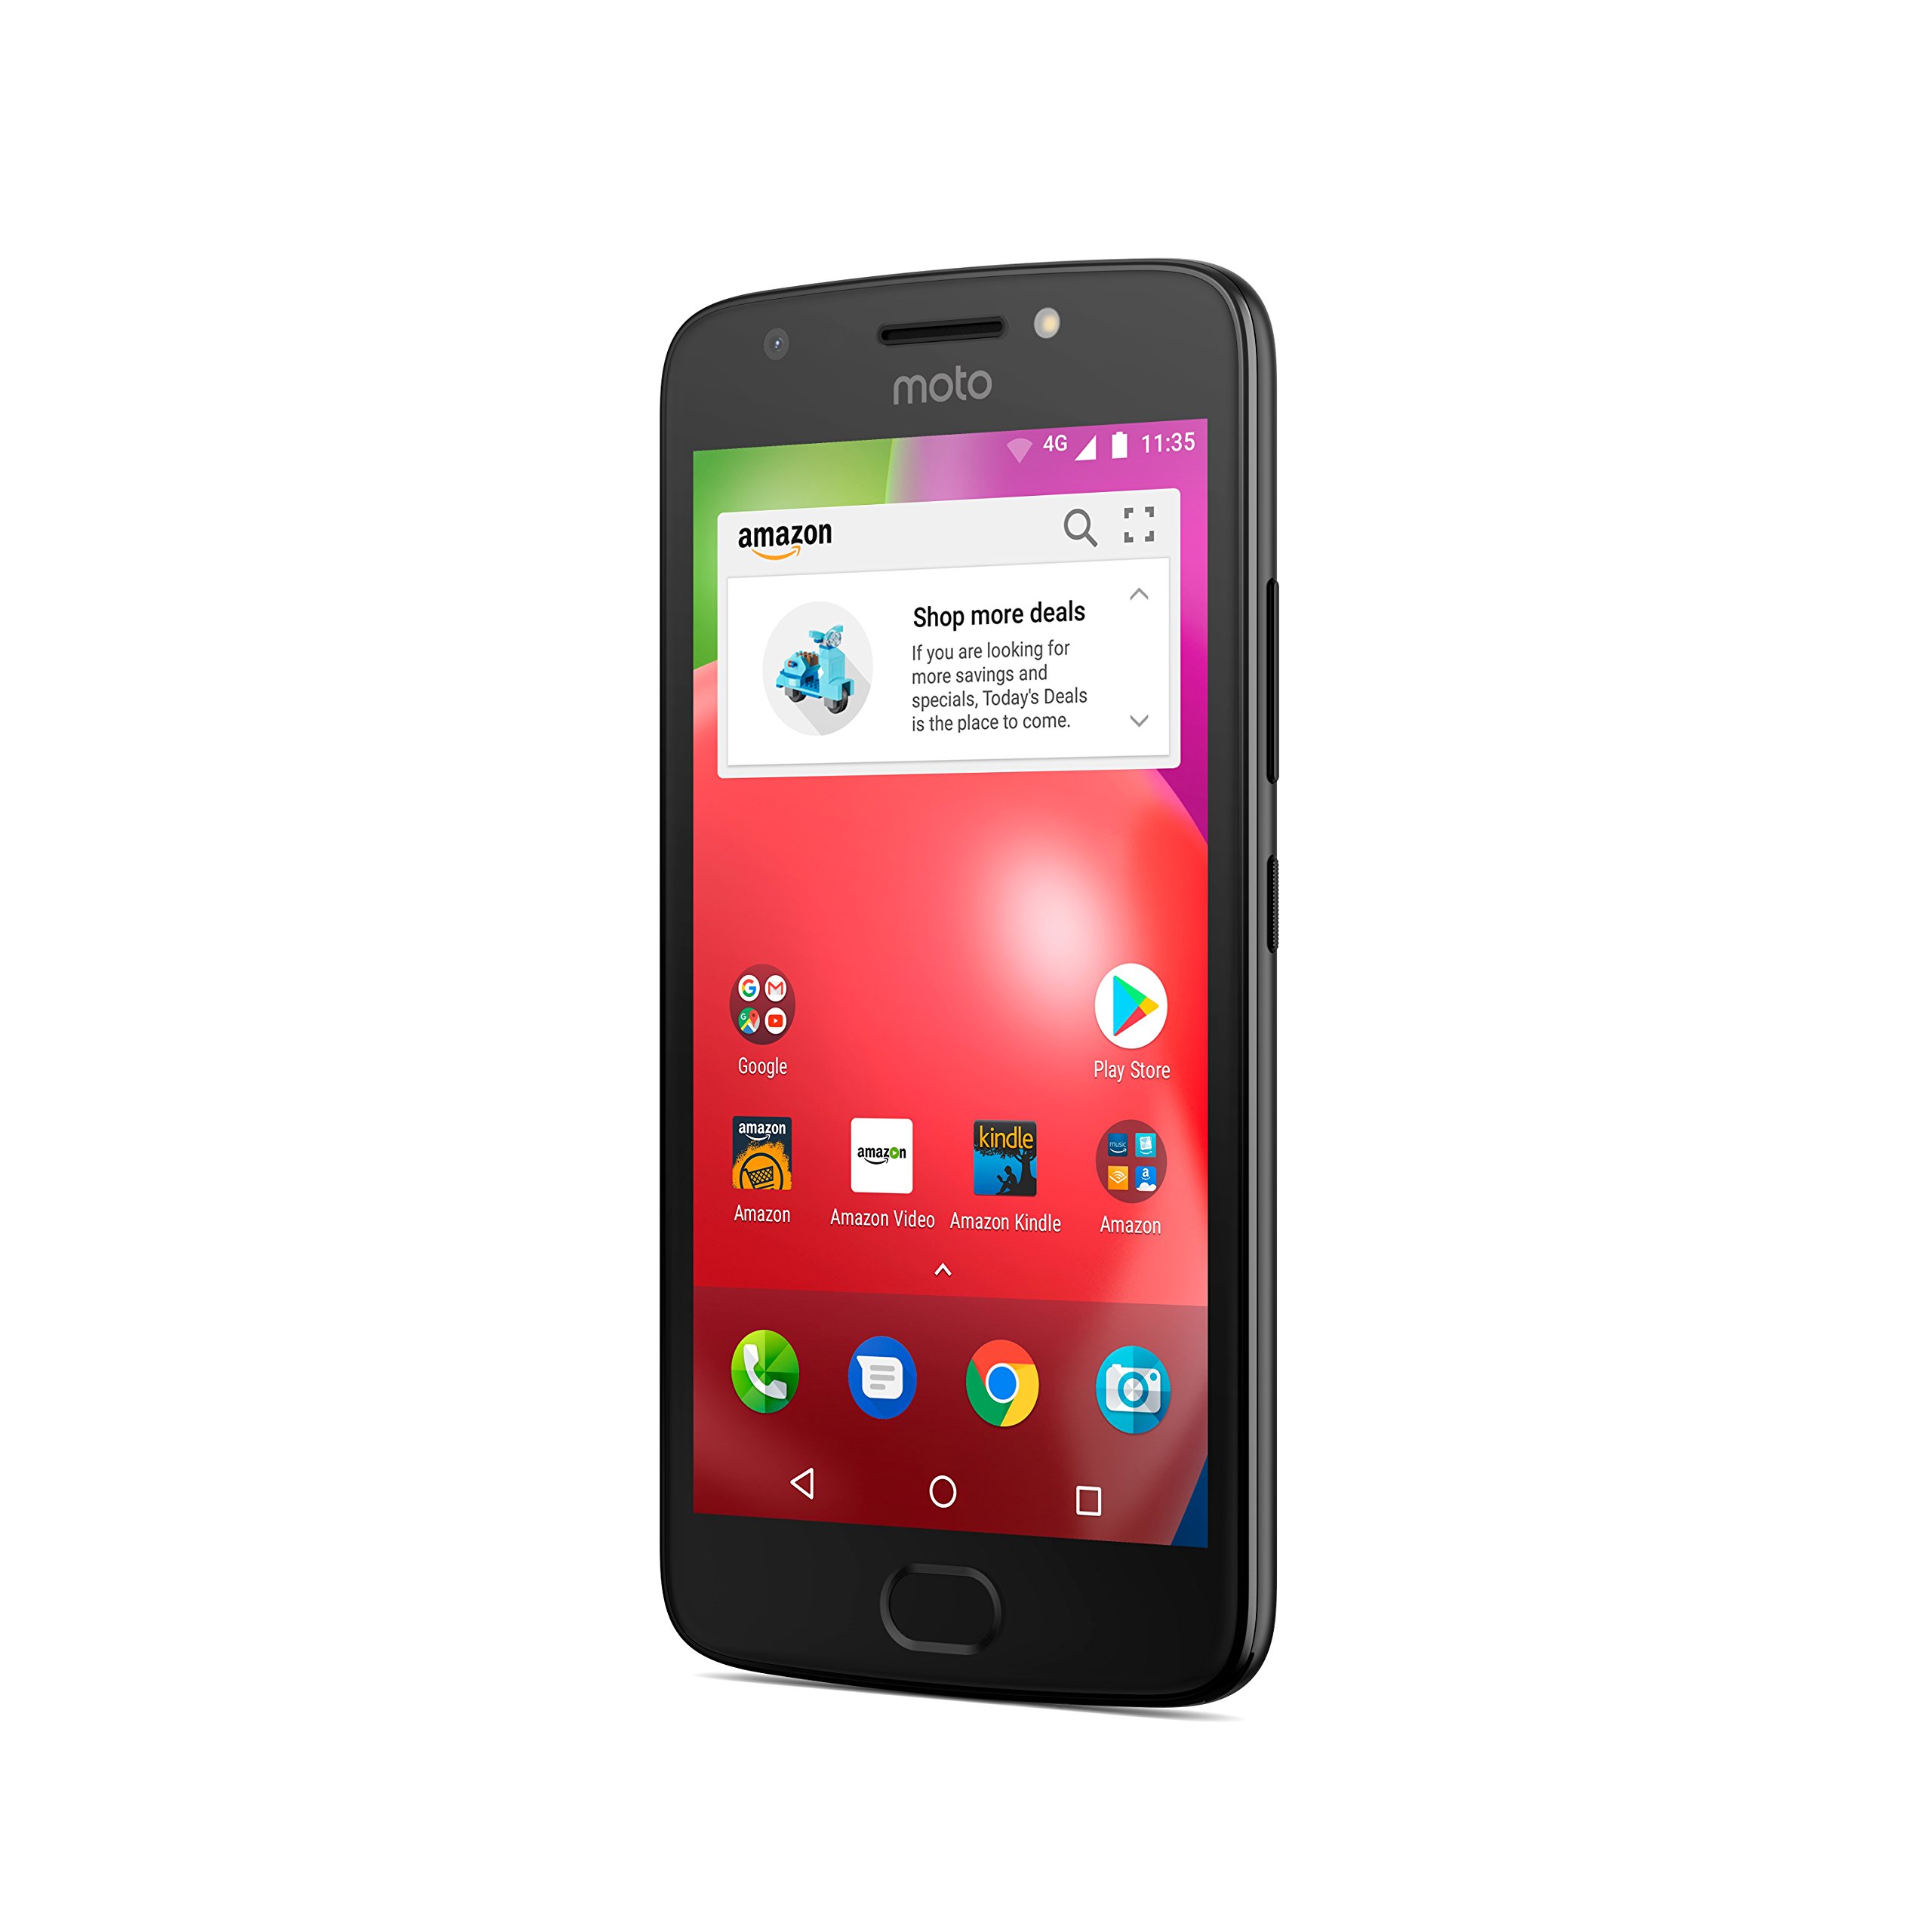 Moto E (4th Generation) - 16 GB - Unlocked (AT&T/Sprint/T-Mobile/Verizon) - Black - Prime Exclusive - with Lockscreen Offers & Ads